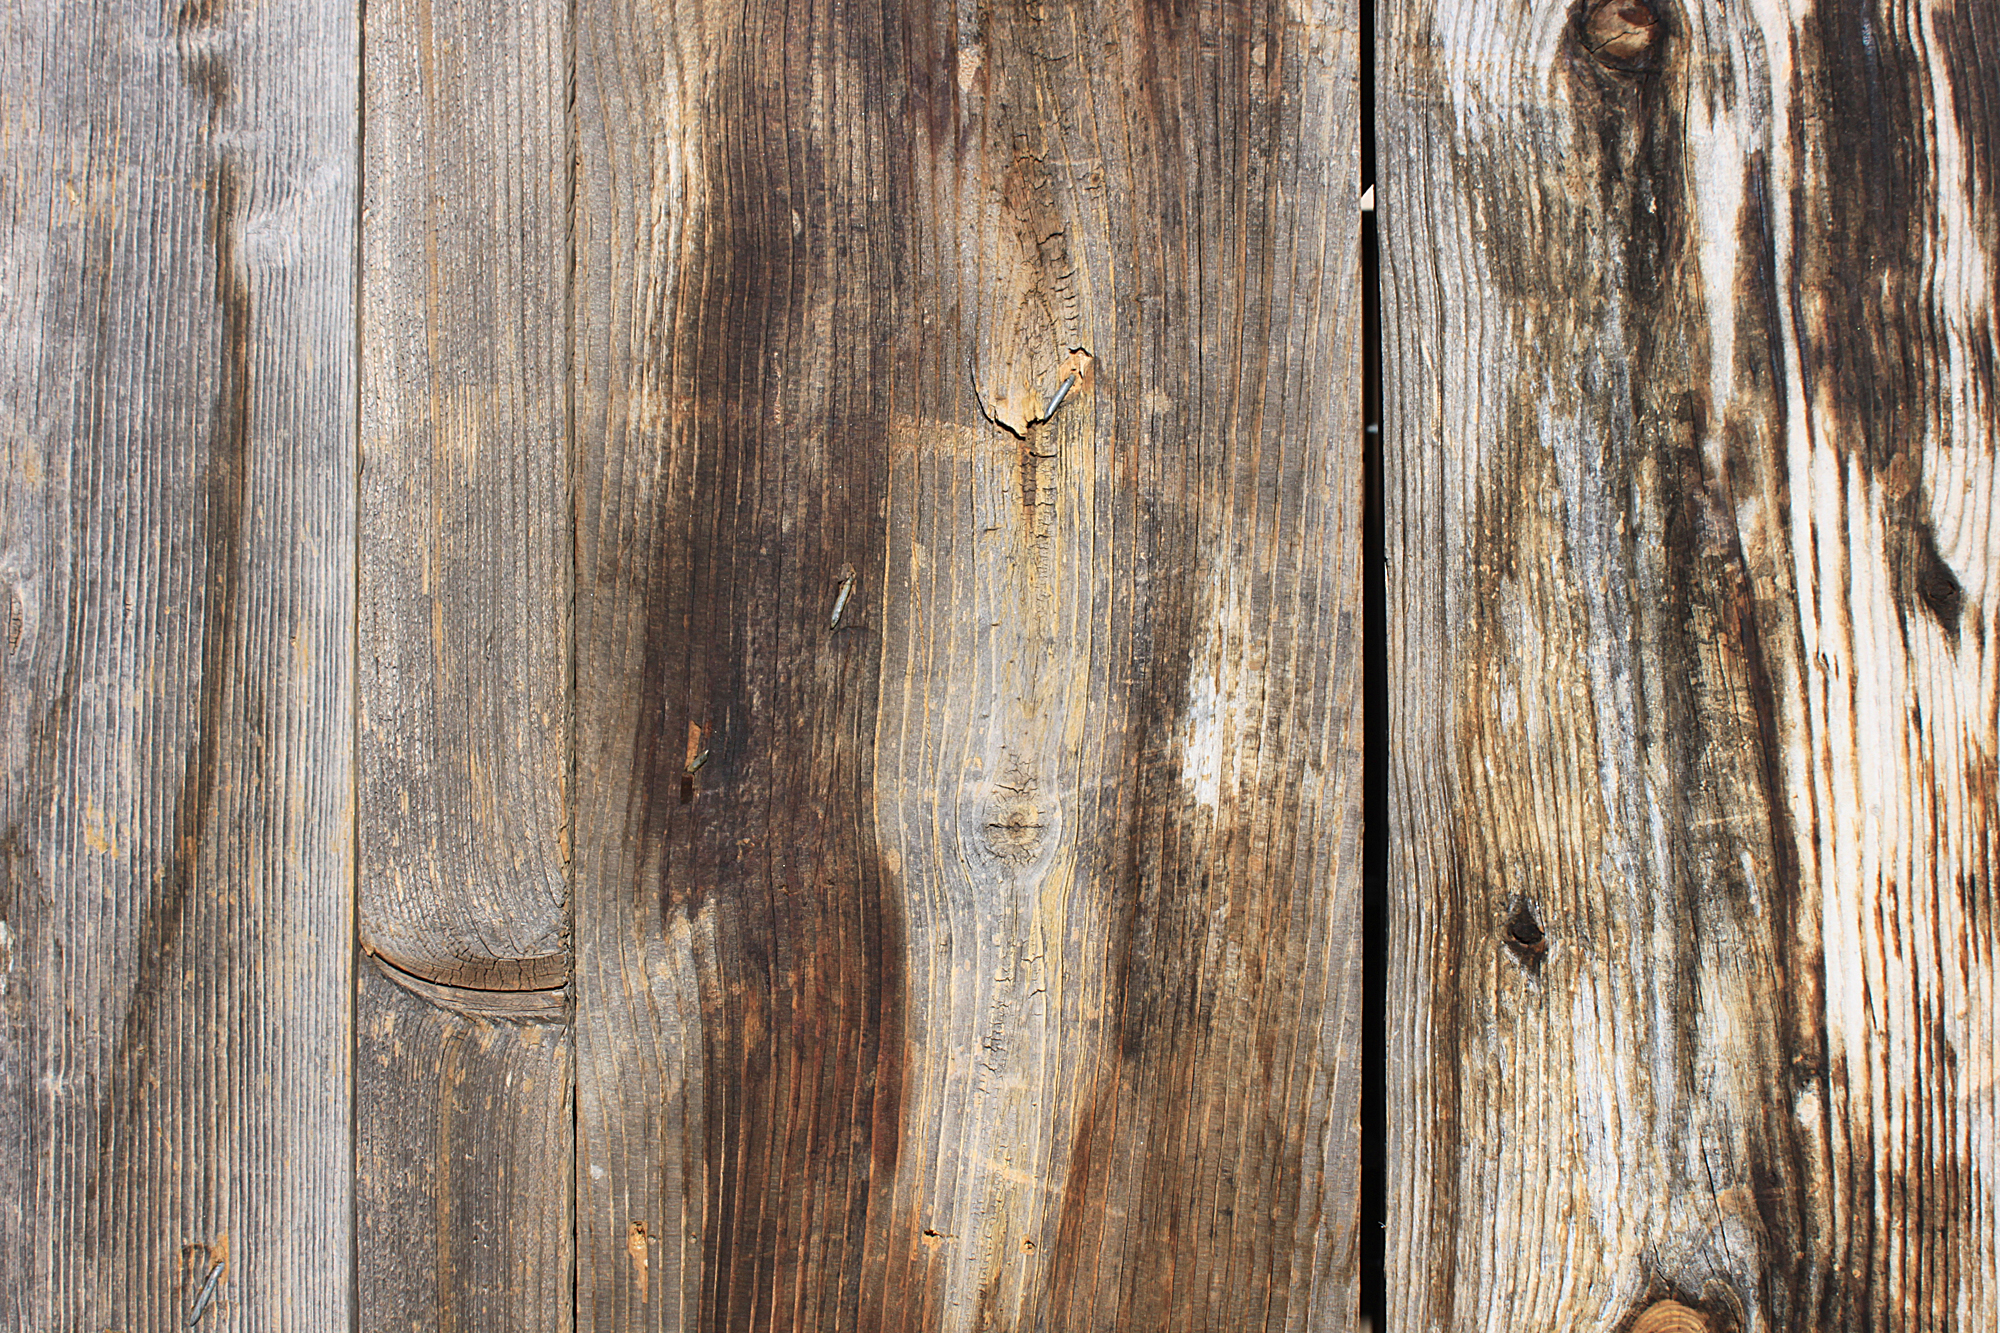 Details 200 high resolution rustic wood background - Abzlocal.mx